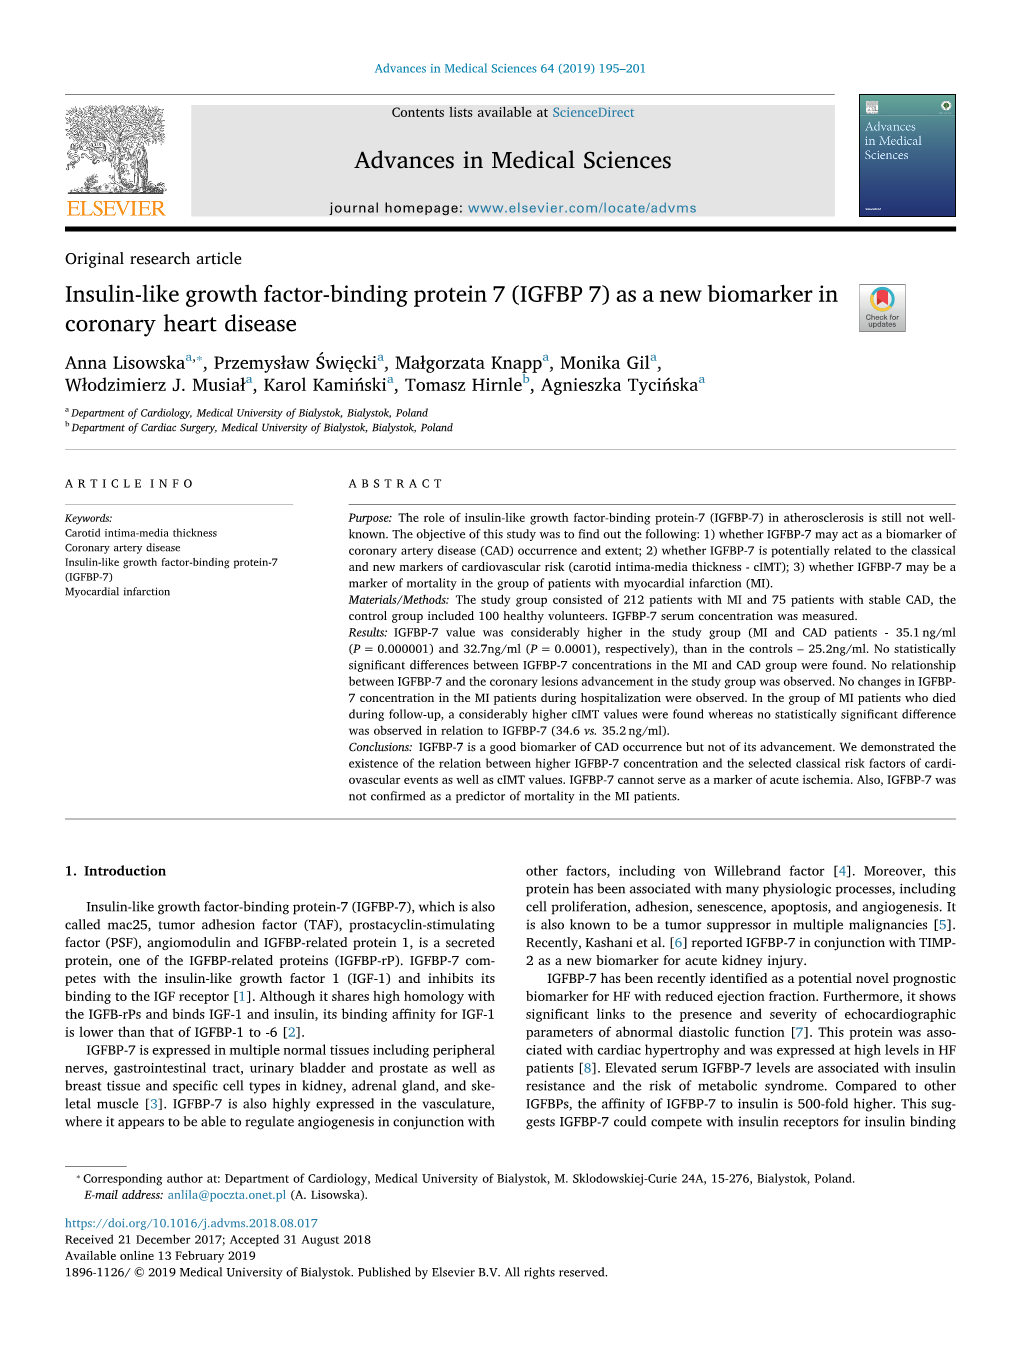 Insulin-Like Growth Factor-Binding Protein 7 (IGFBP 7) As a New